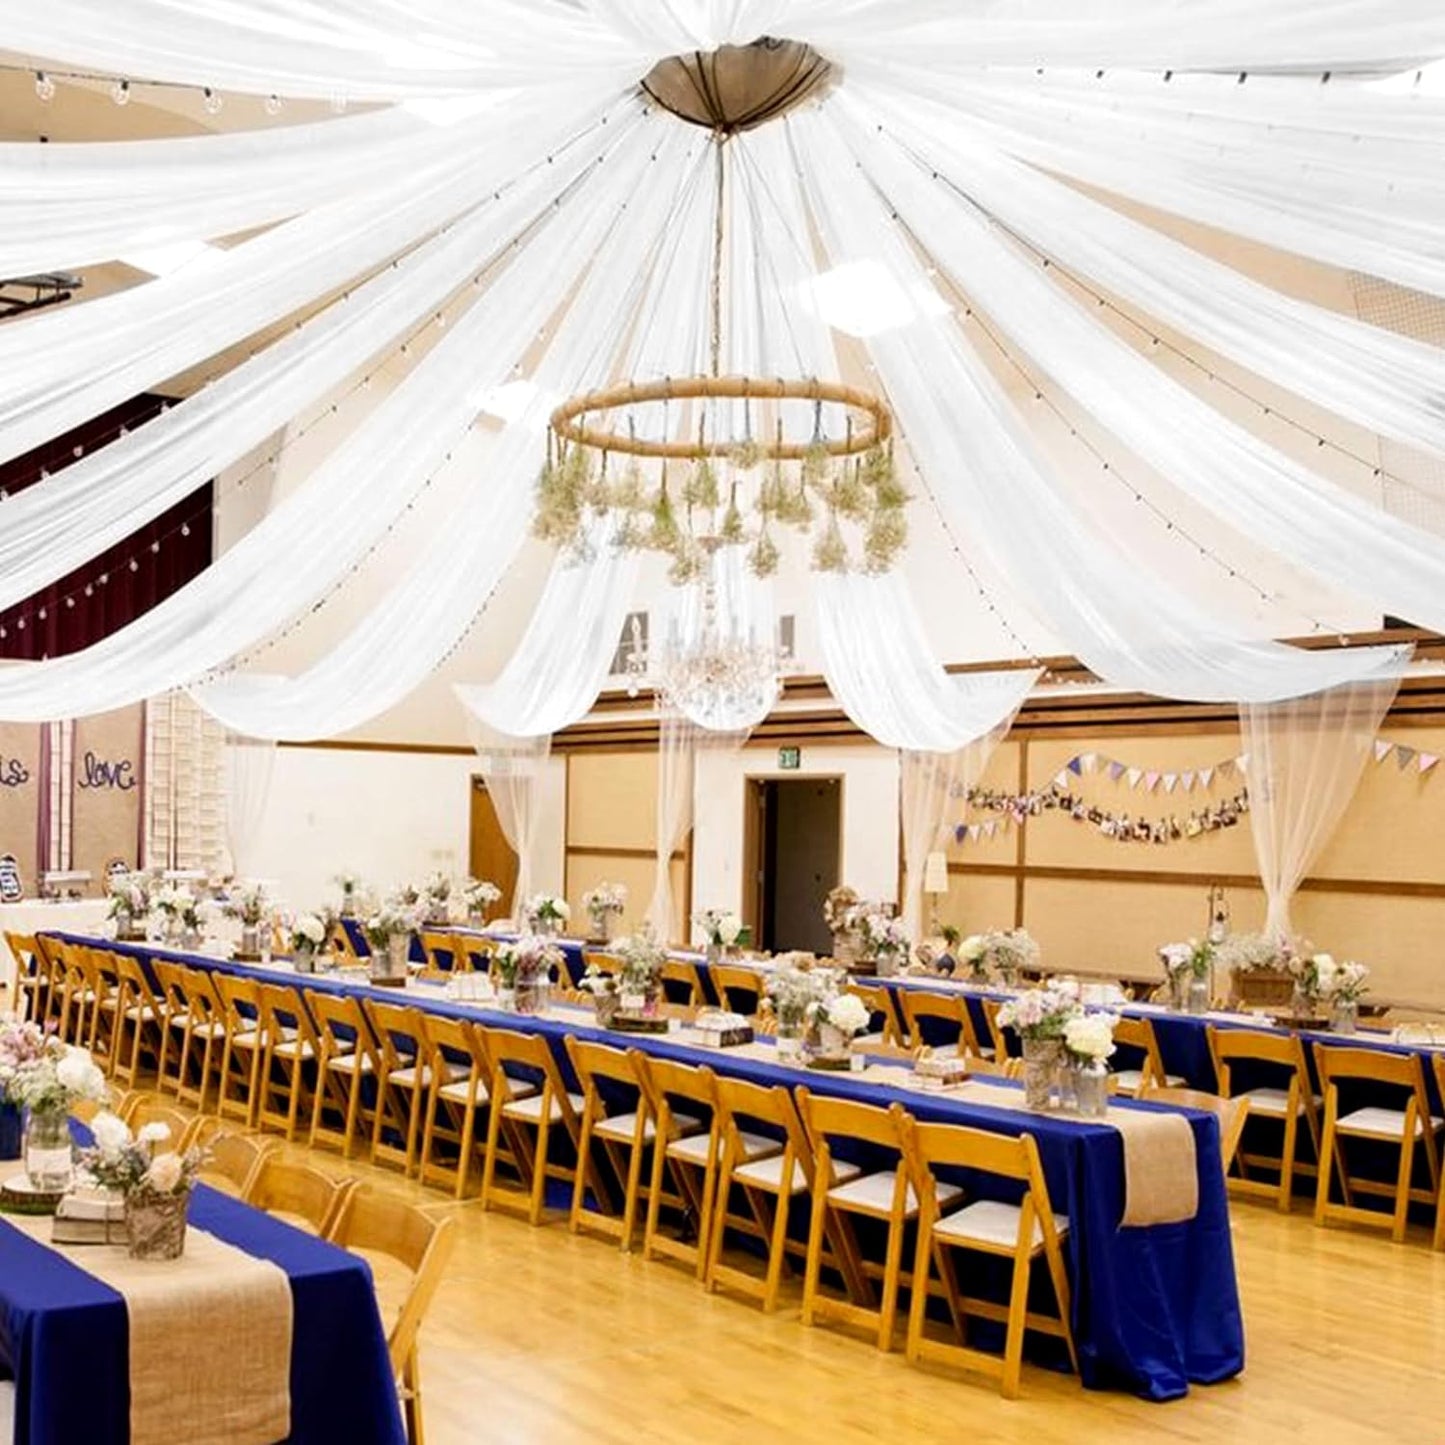 6 Panels White Ceiling Drapes for Wedding Ceiling Drapes 5Ftx20Ft Wedding Arch Draping Fabric Sheer Curtains Voile Chiffon Drapery Draping Wedding Ceiling Decorations for Party Ceremony Stage Swag  Showgeous White 8 Panel-5Ftx10Ft(60"Wx120"L) 